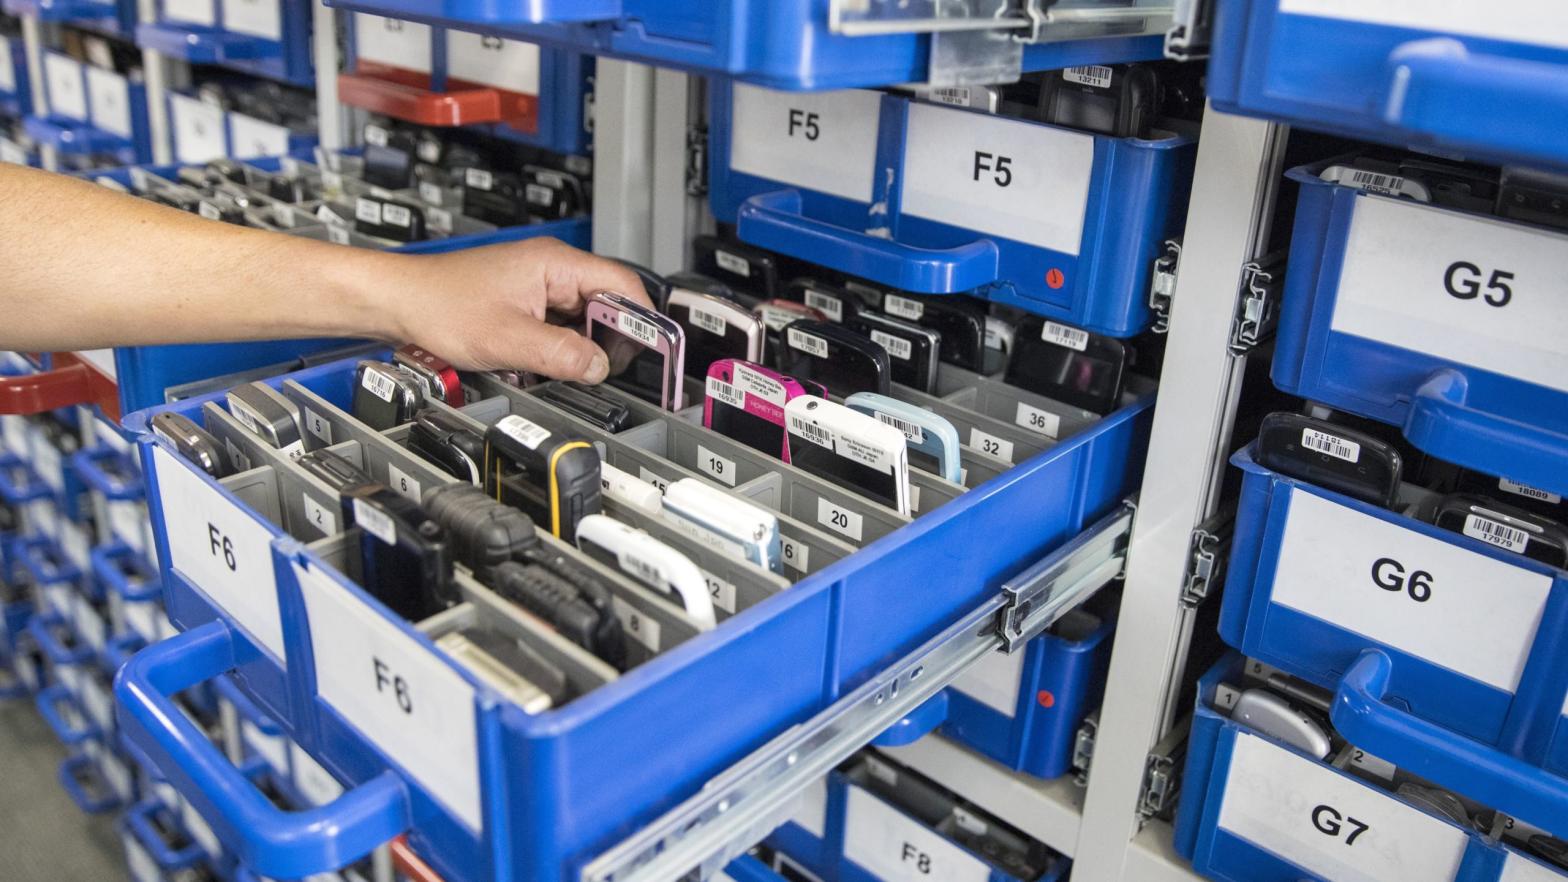 Drawers of cell phones stored at Israeli firm Cellebrite's research lab in Petah Tikva in 2016. (Photo: Jack Guez/AFP, Getty Images)